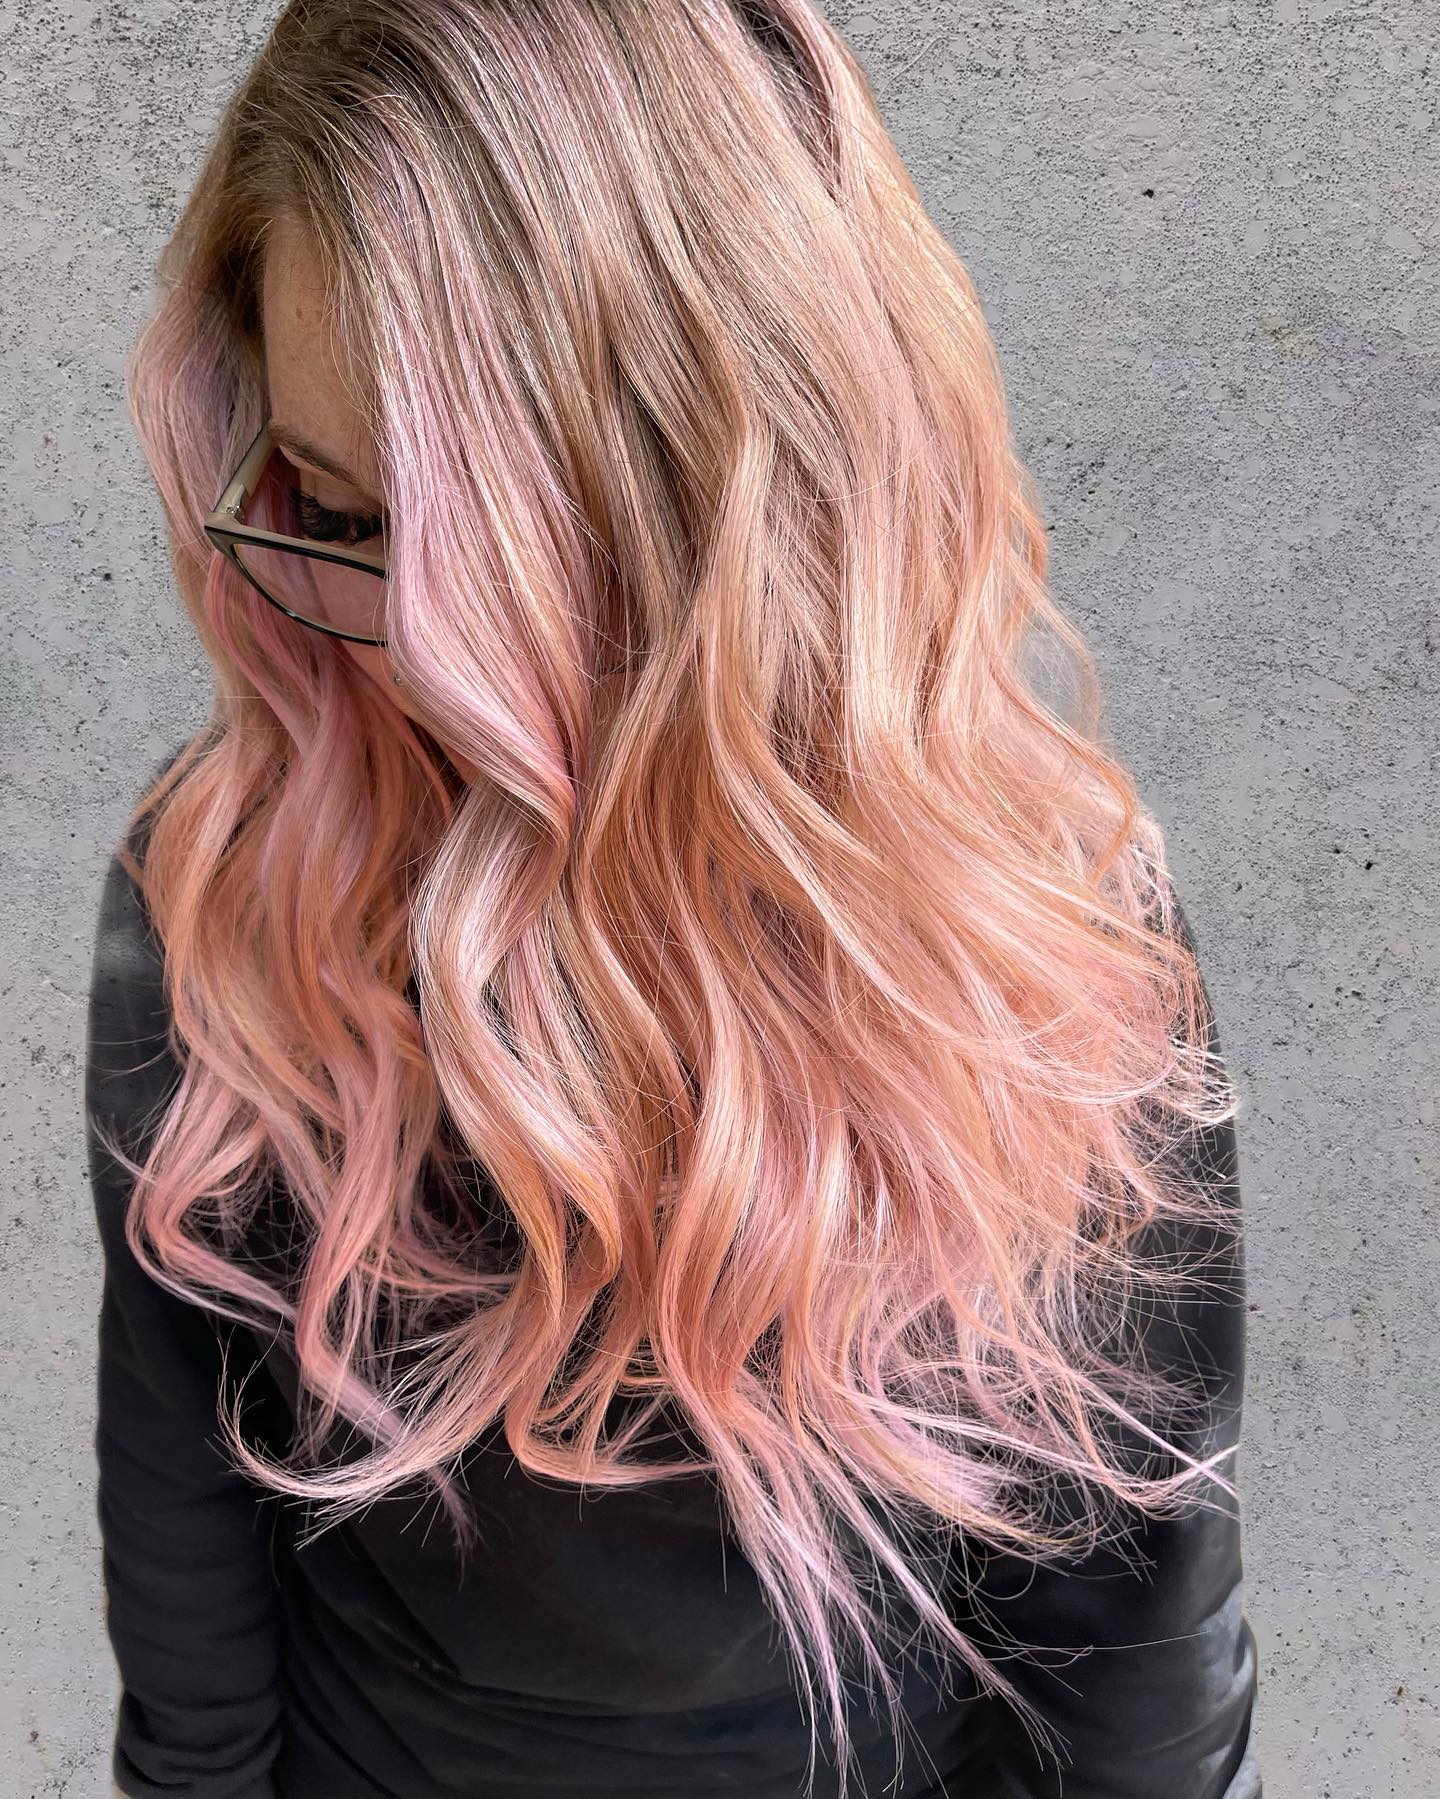 pink ombre hair color 64 Ombre pink hair blonde | Pastel pink ombre hair | Pink balayage Hair Pink Ombre Hair Color for Women